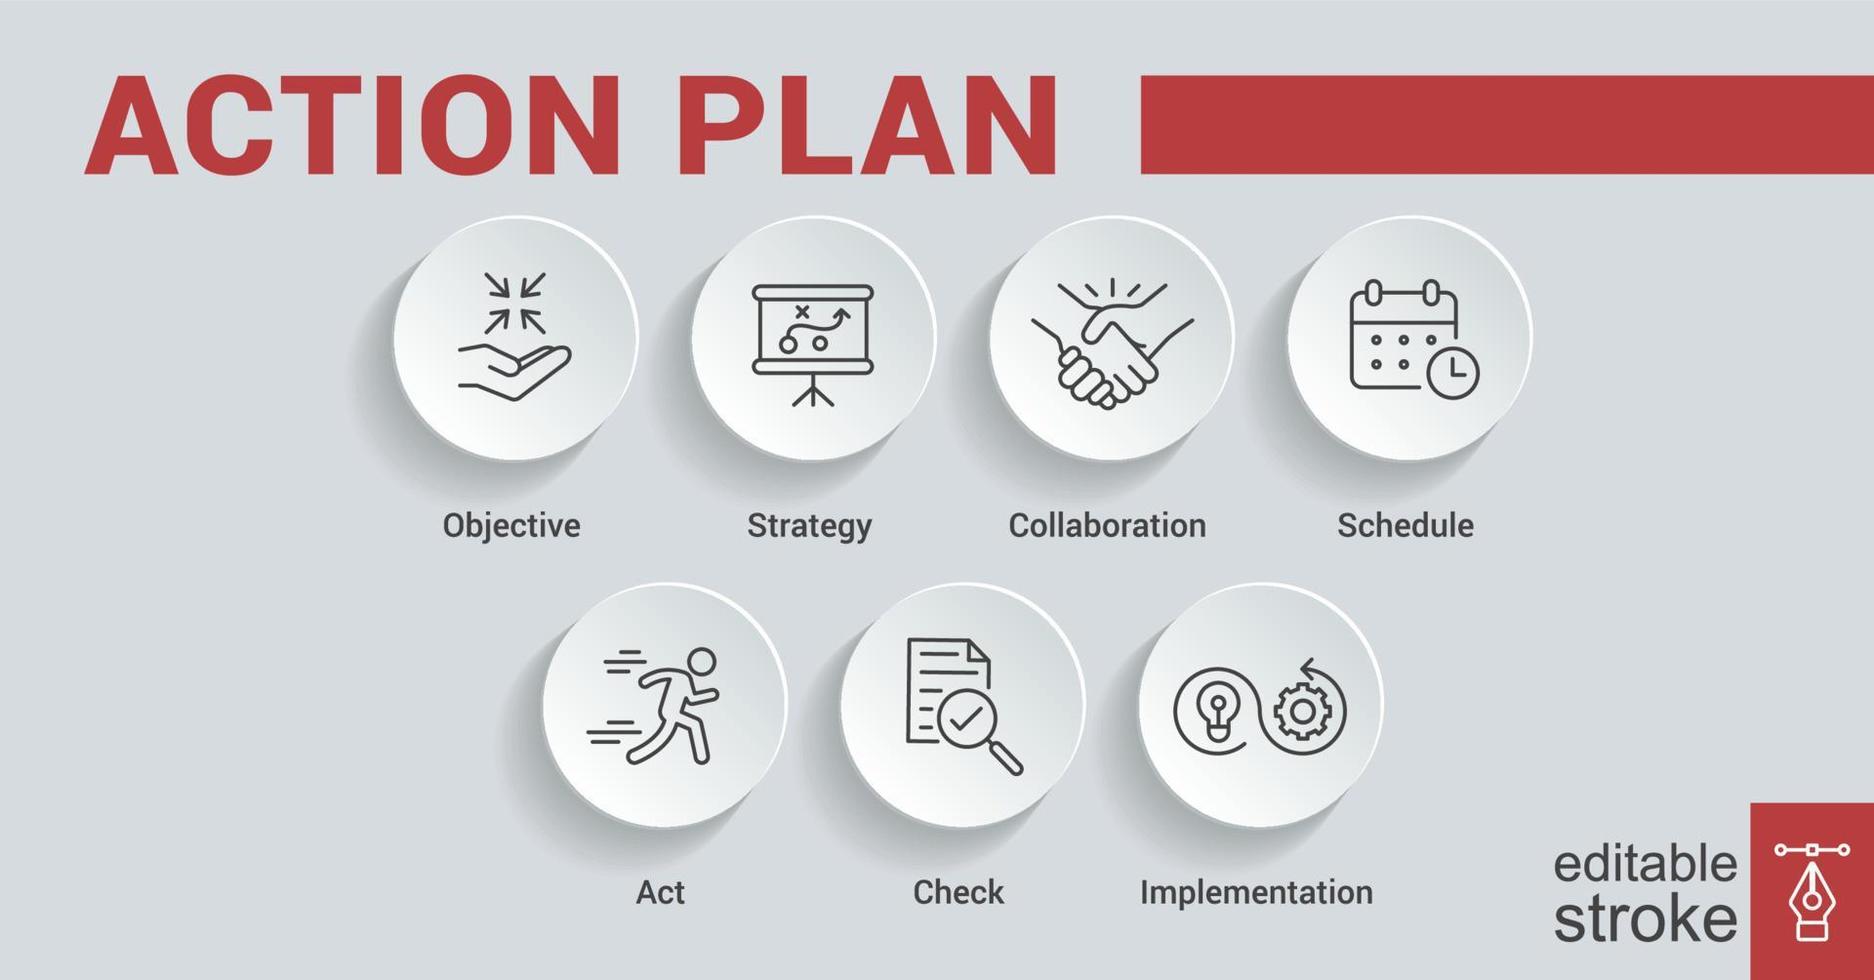 Action plan banner web icon for business and marketing. objective, strategy, Collaboration, Schedule, Plan and implementation. Minimal vector infographic. Editable stroke EPS 10.